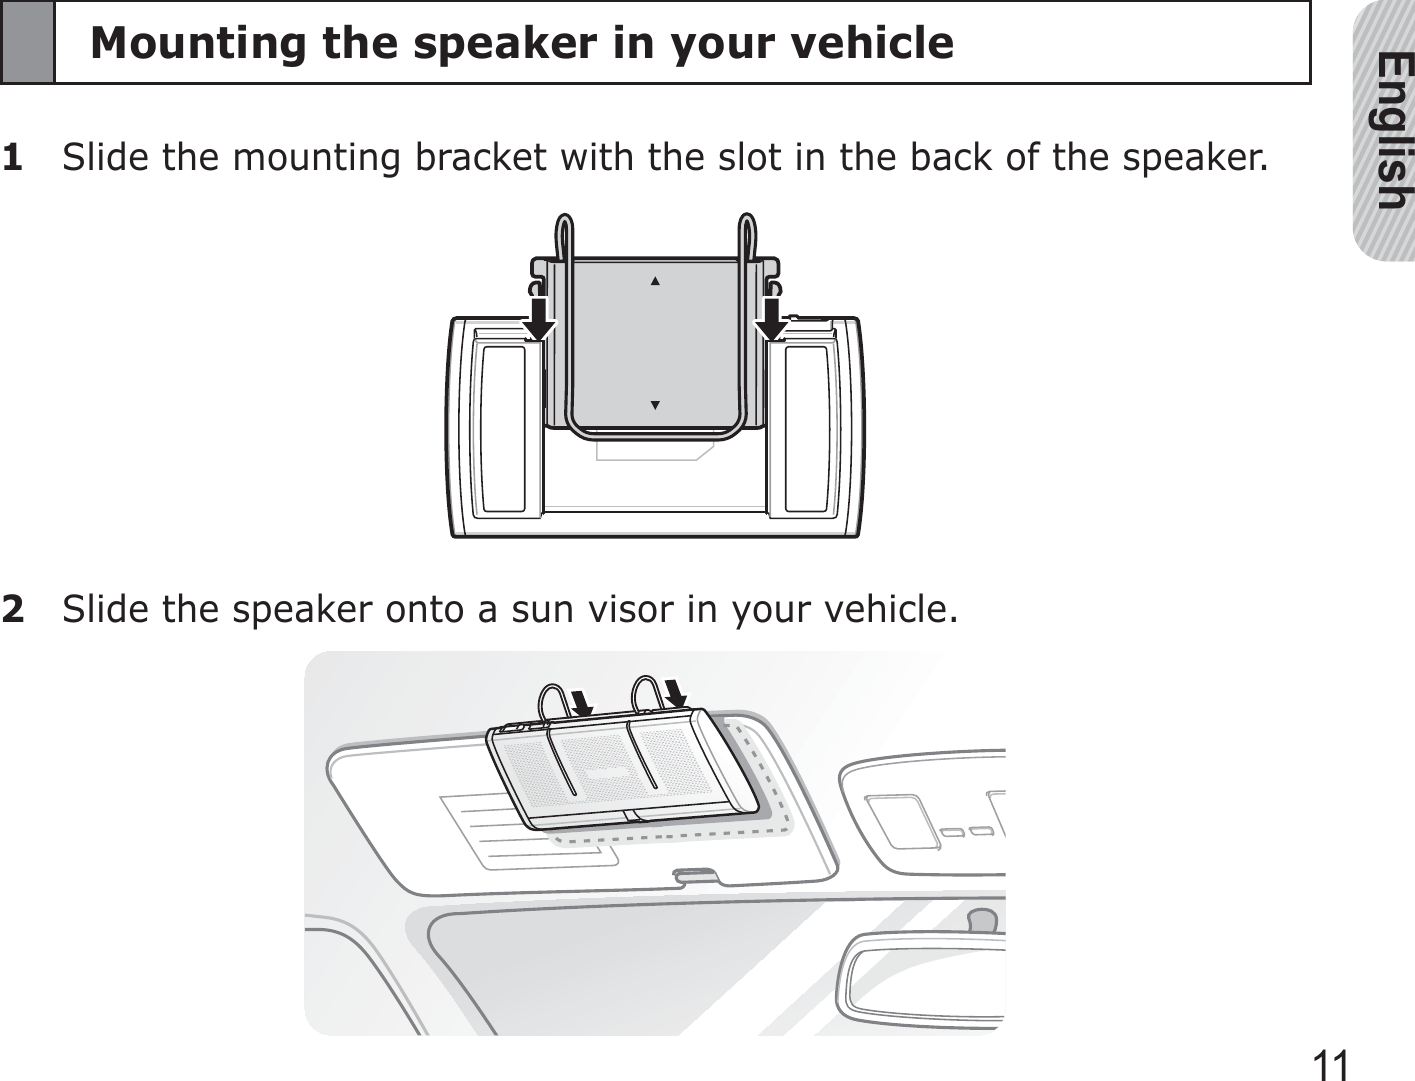 English11Mounting the speaker in your vehicle1  Slide the mounting bracket with the slot in the back of the speaker.2  Slide the speaker onto a sun visor in your vehicle.